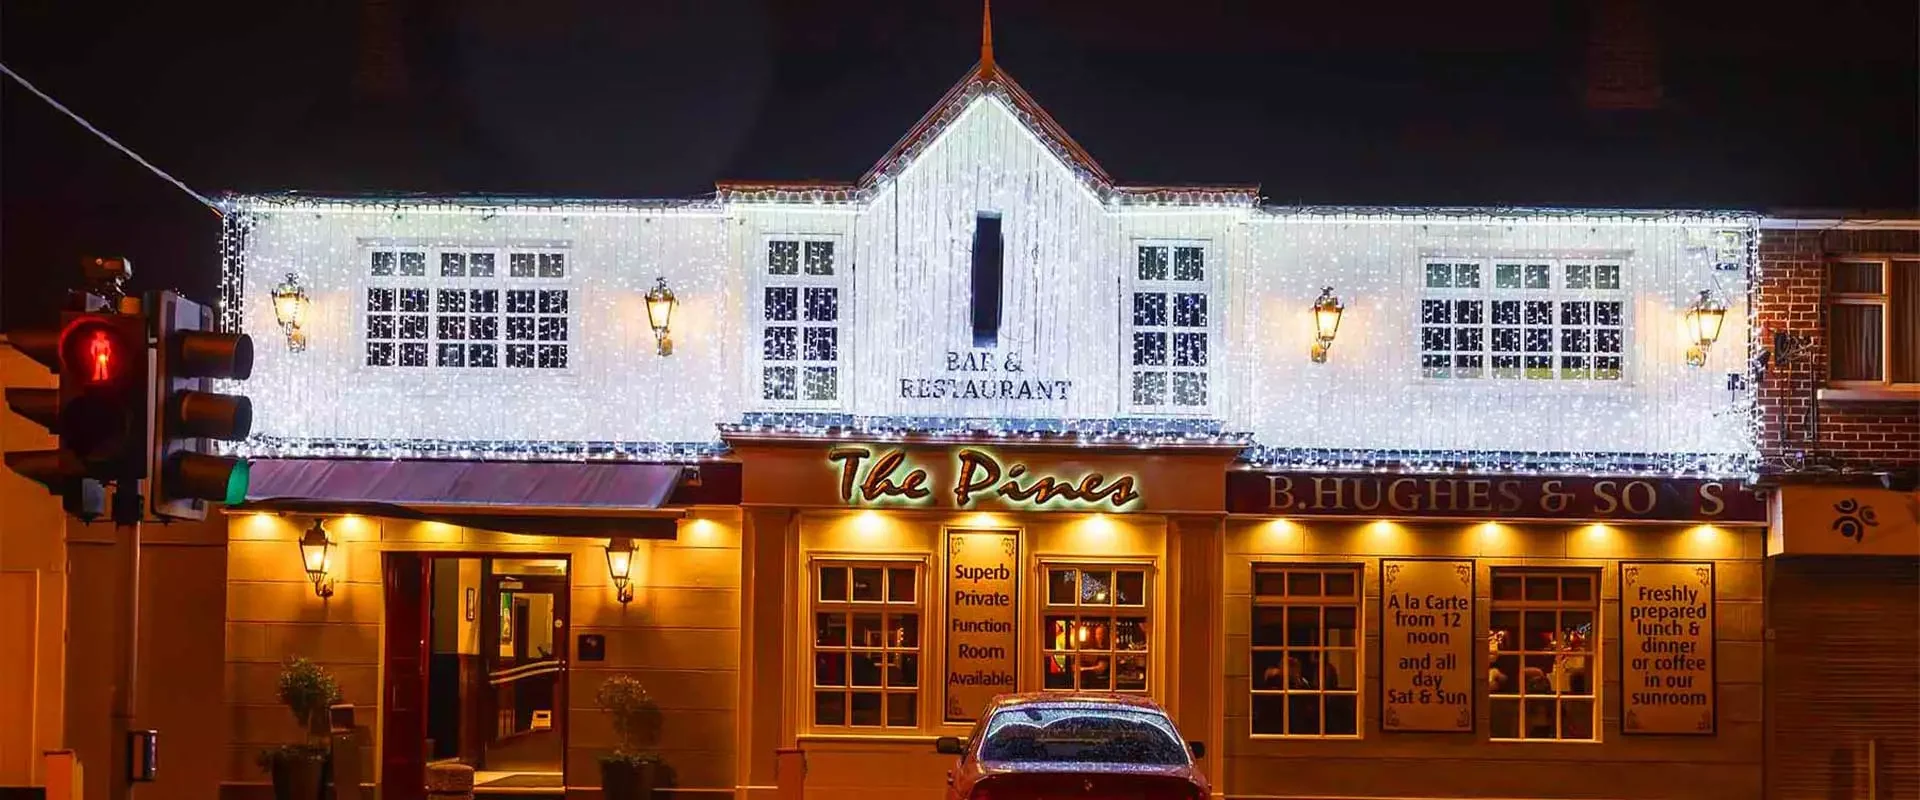 Bars and restaurants Christmas lighting projects